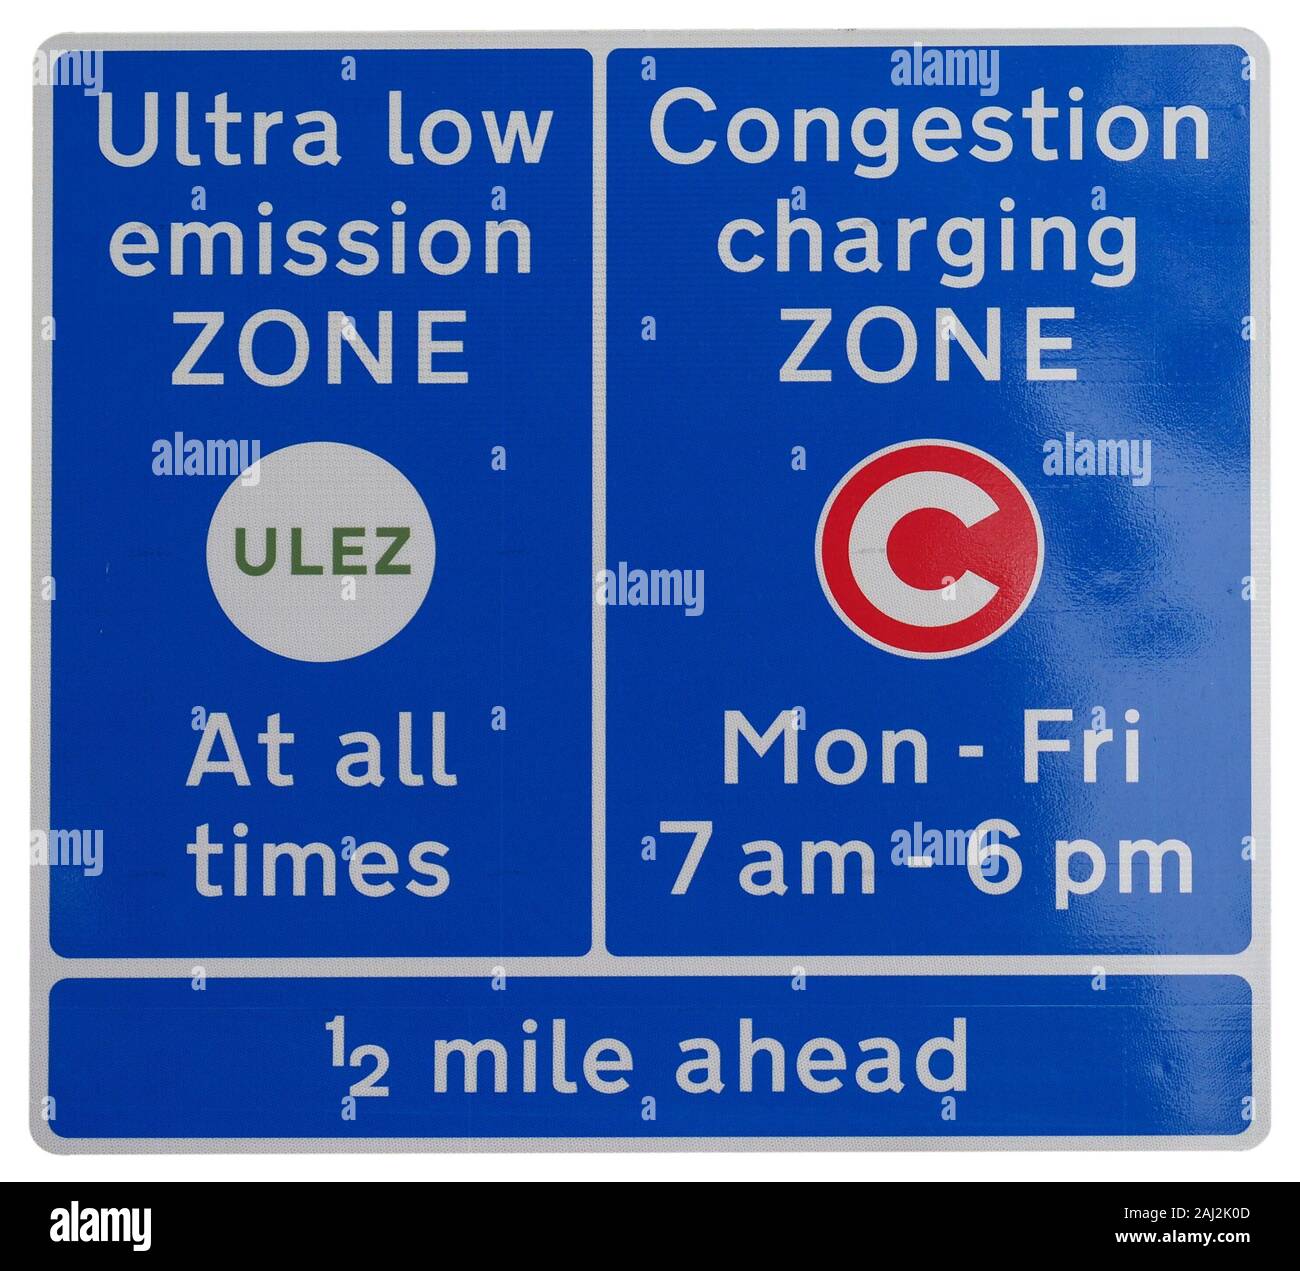 ULEZ (Ultra low emission zone at all times) and C (Congestion charging zone) signs in London, UK isolated over white background Stock Photo